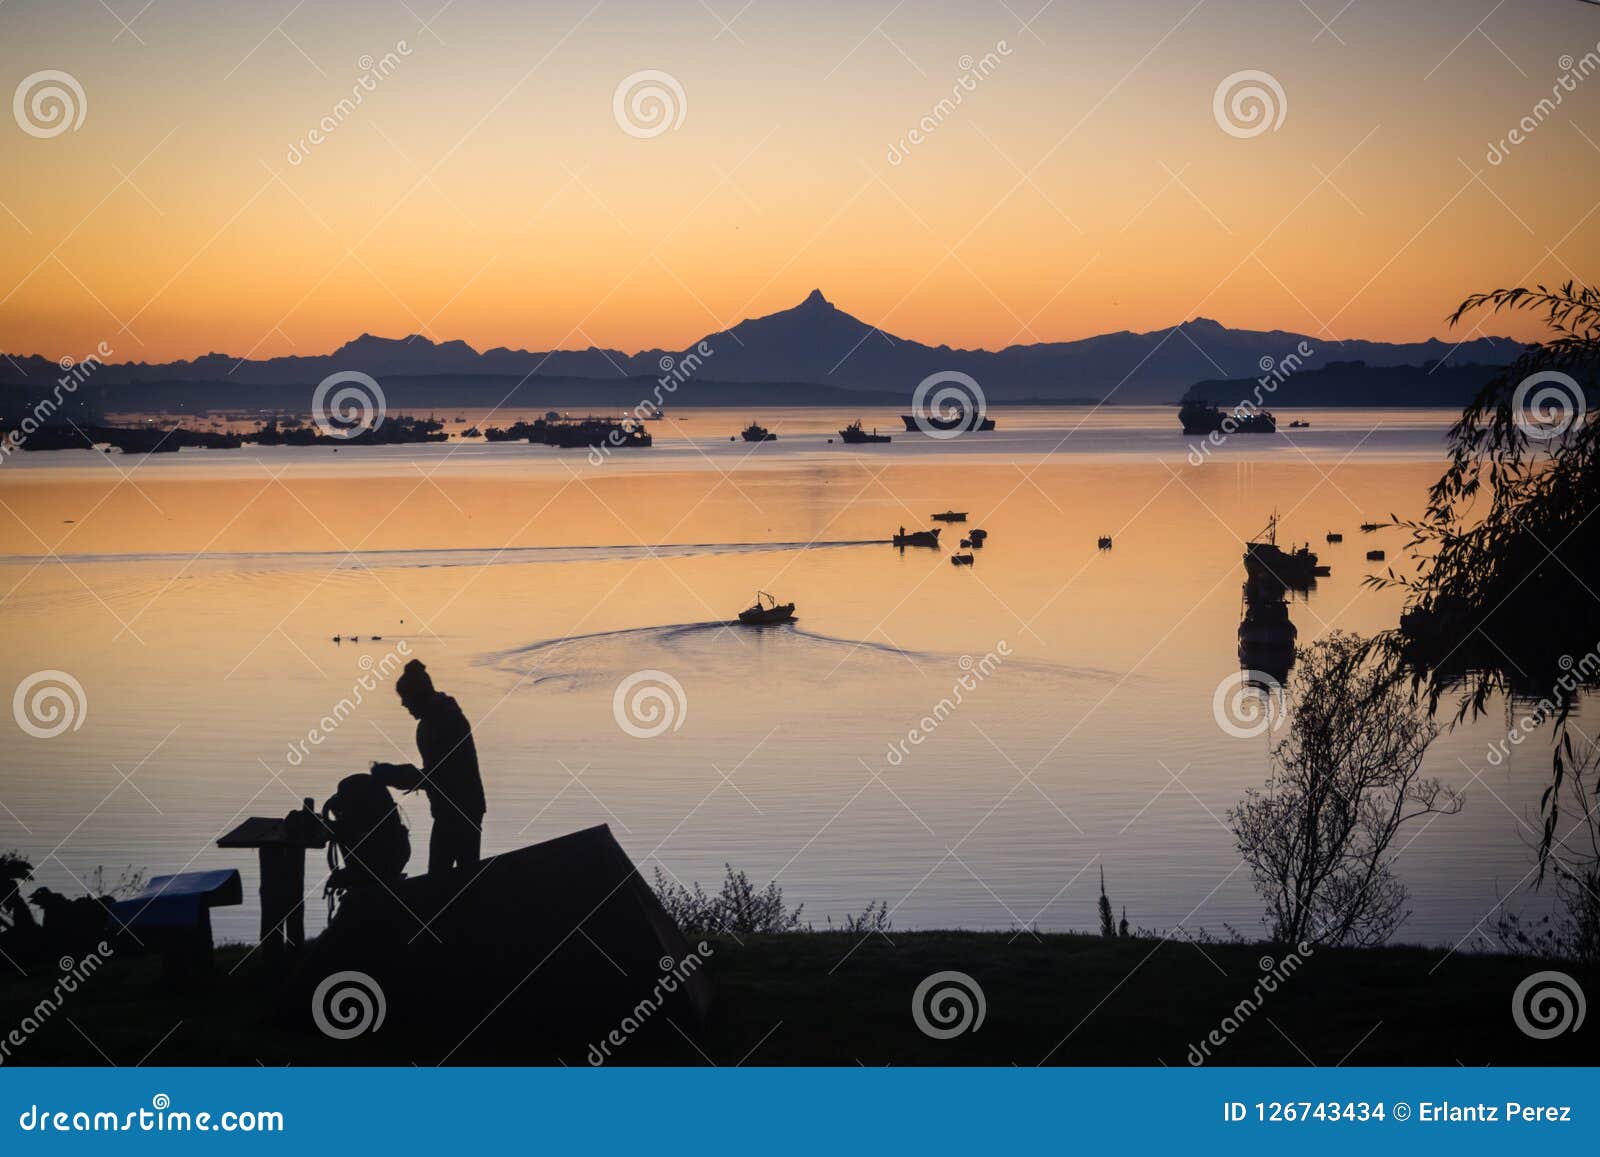 sunrise in the harbour of quellon in chiloe island. patagonia in